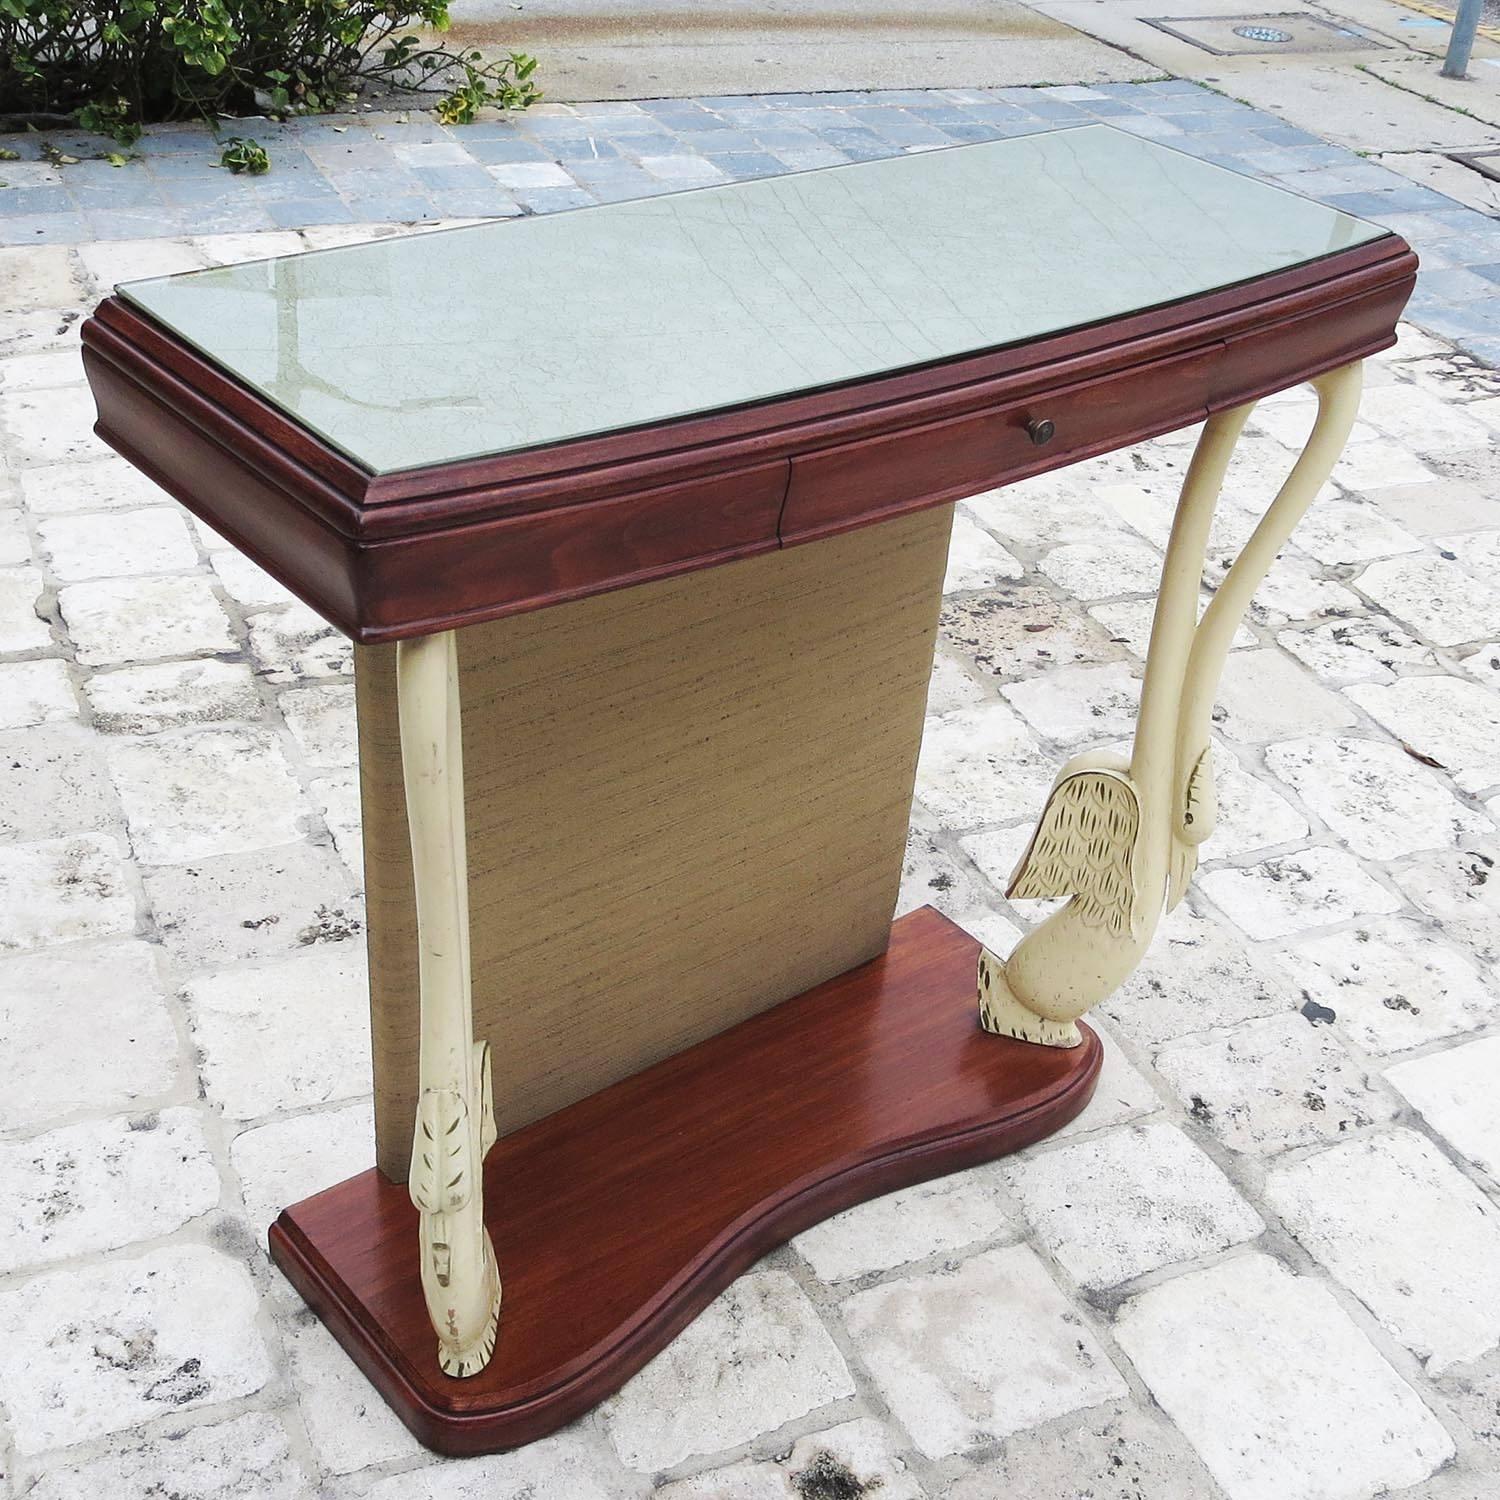 RETIREMENT SALE!!!  EVERYTHING MUST GO - CHECK OUT OUR OTHER ITEMS.				

This charming table features clean lines and a petite scale. The woods are a combination of painted and natural finishes. The centre panel is wrapped in original fabric. The